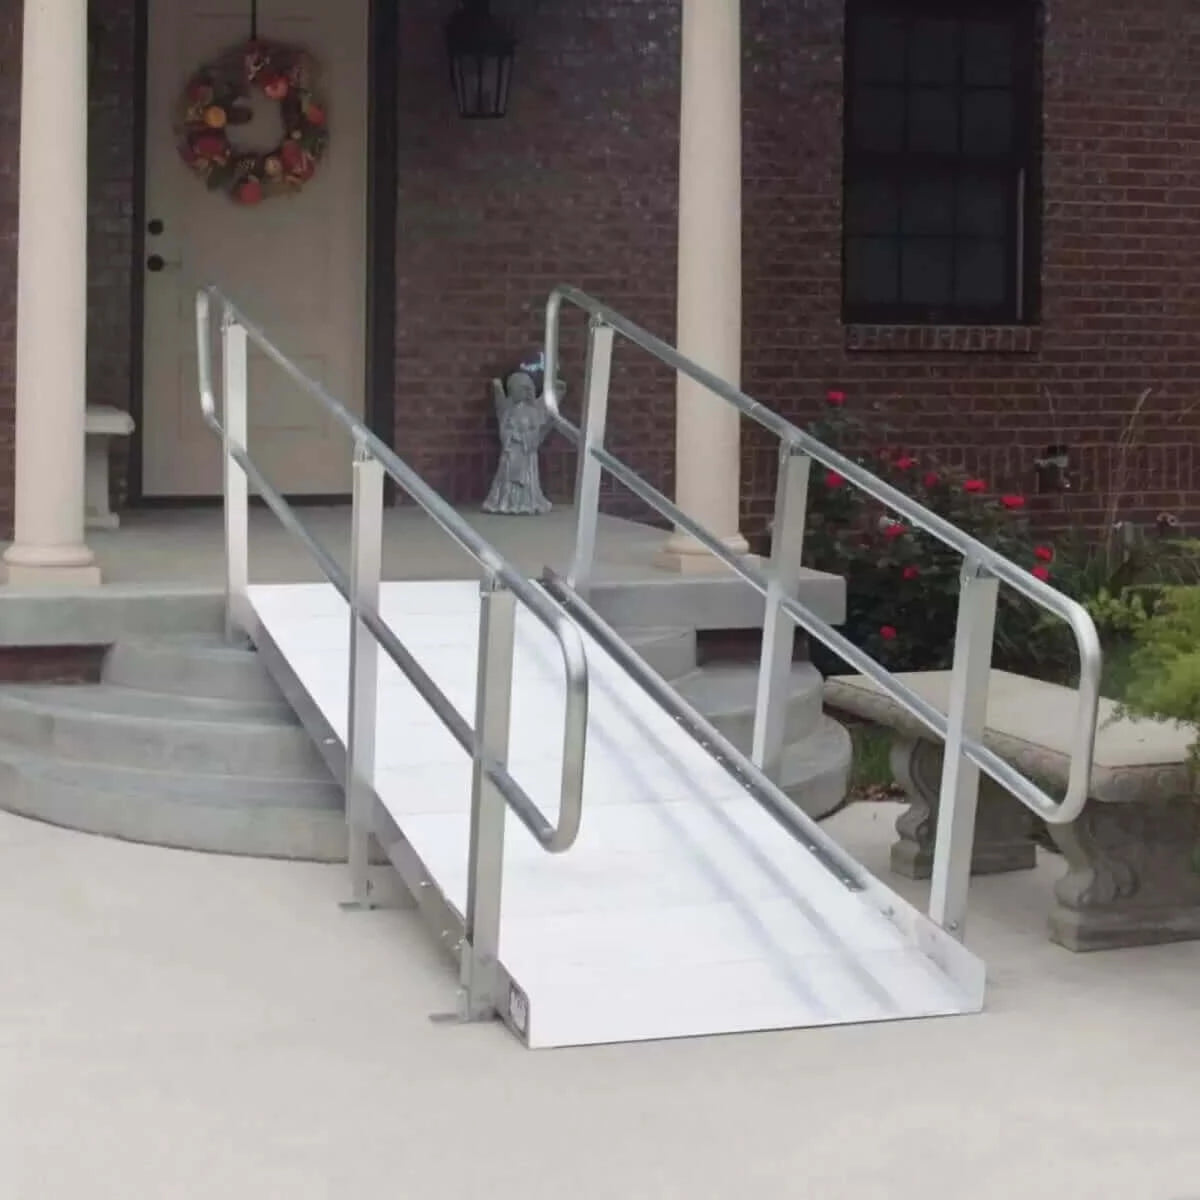 PVI On Trac ramp over 4 steps at a house